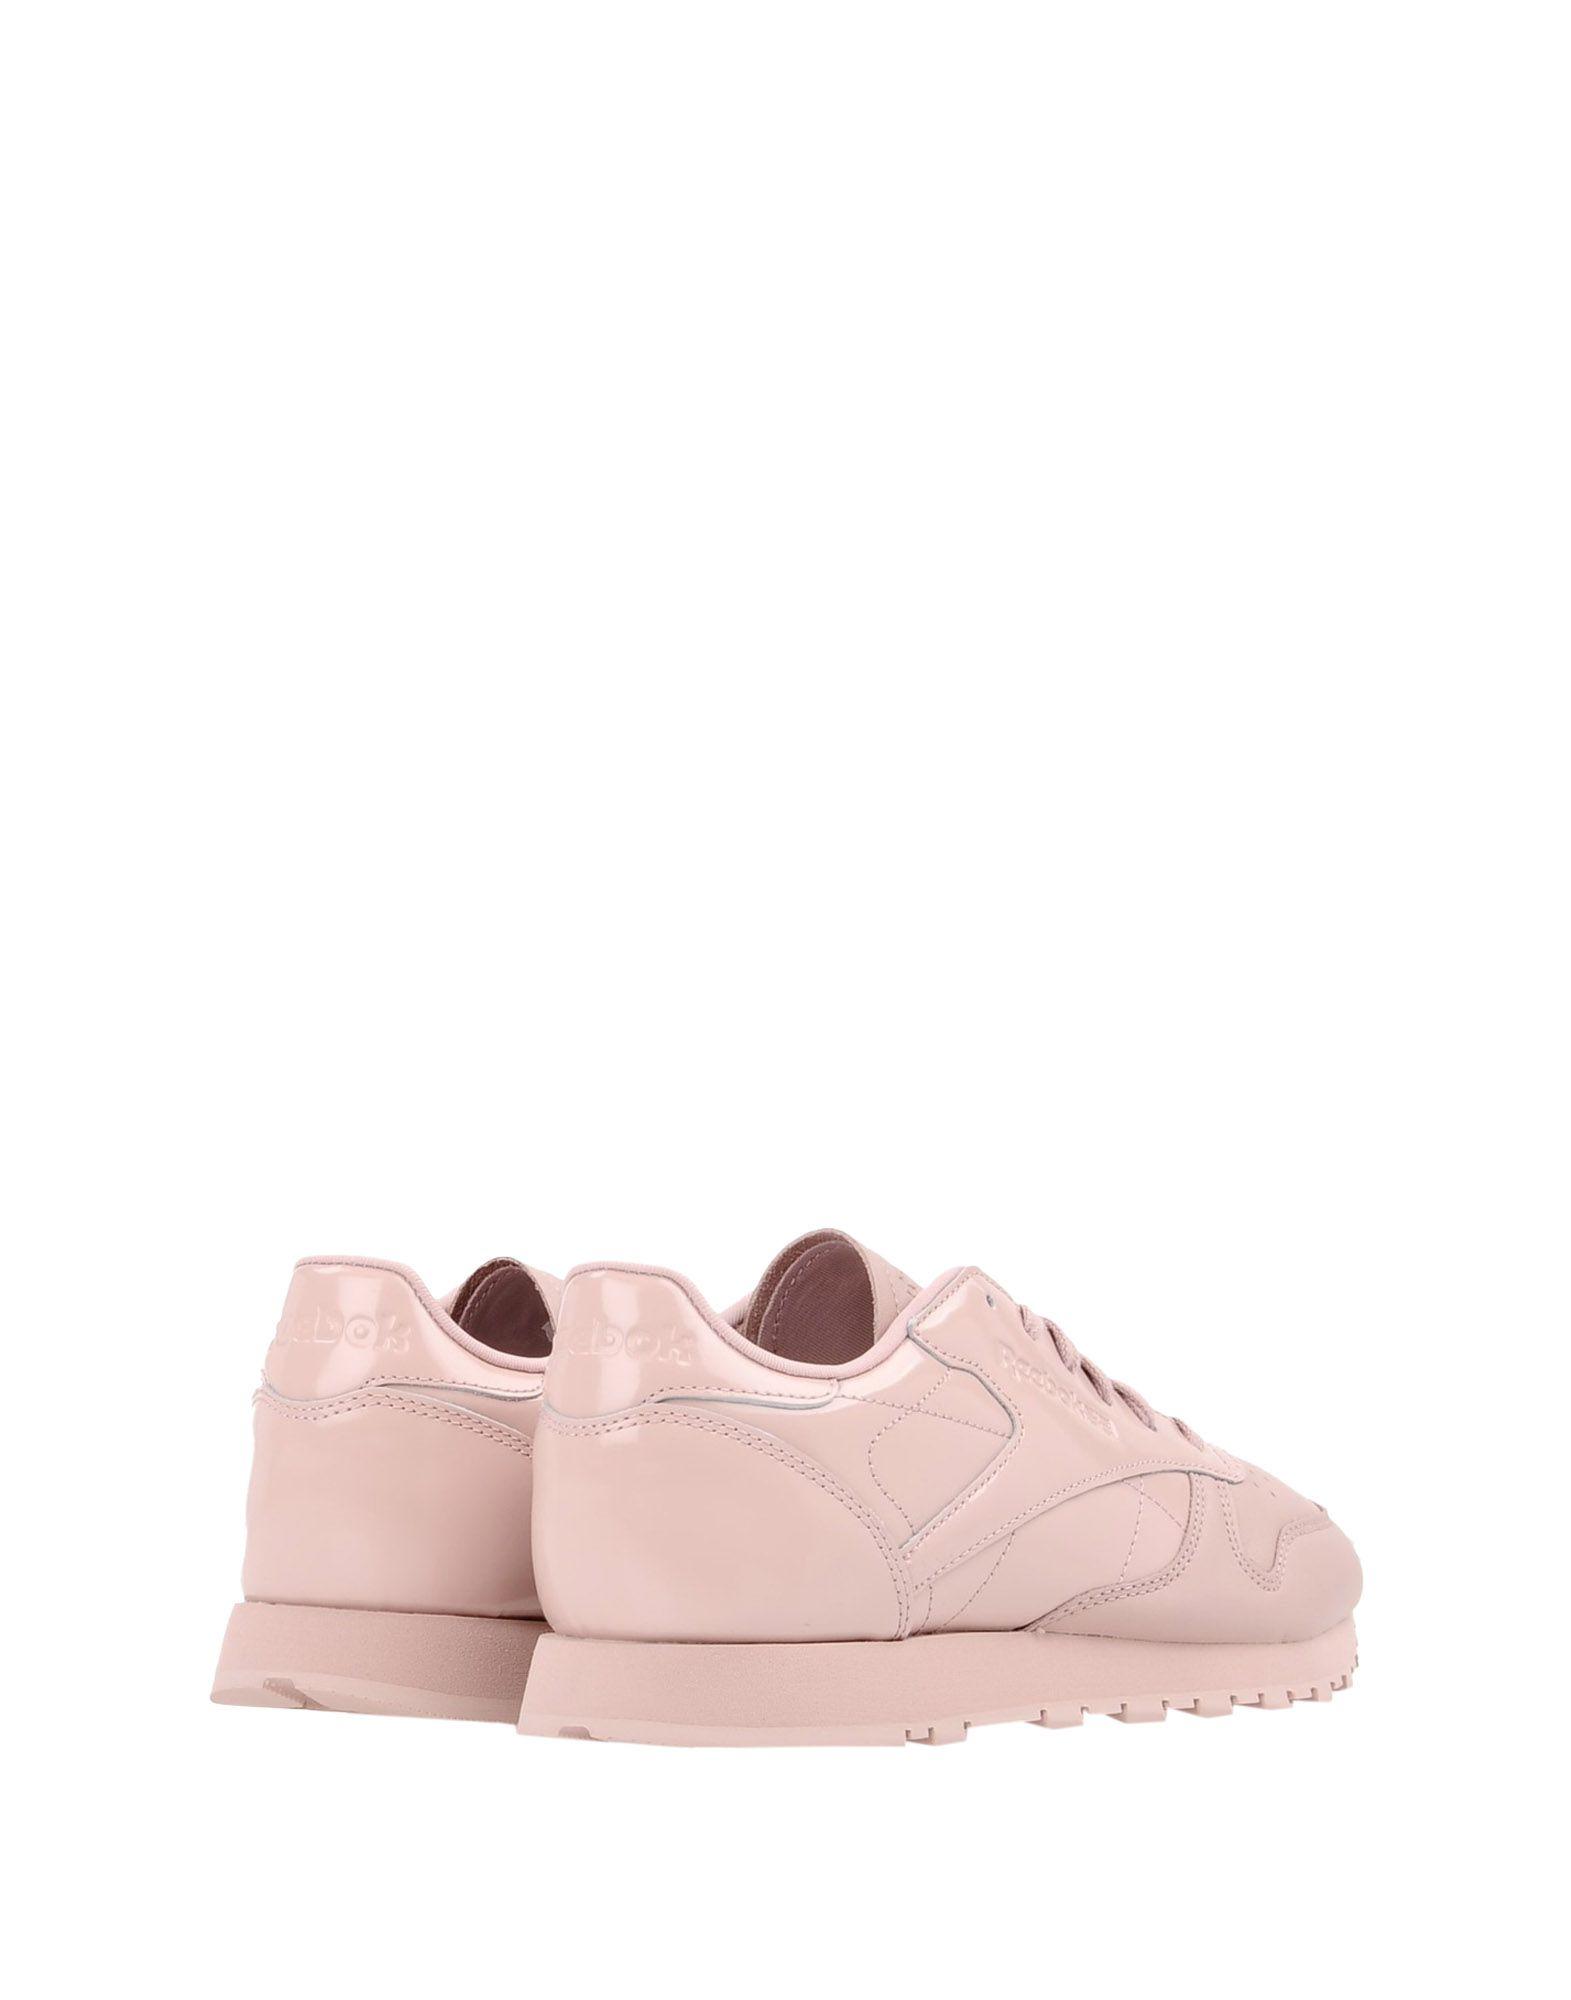 Reebok Pink Classic Leather Pastels Sneakers | Lyst